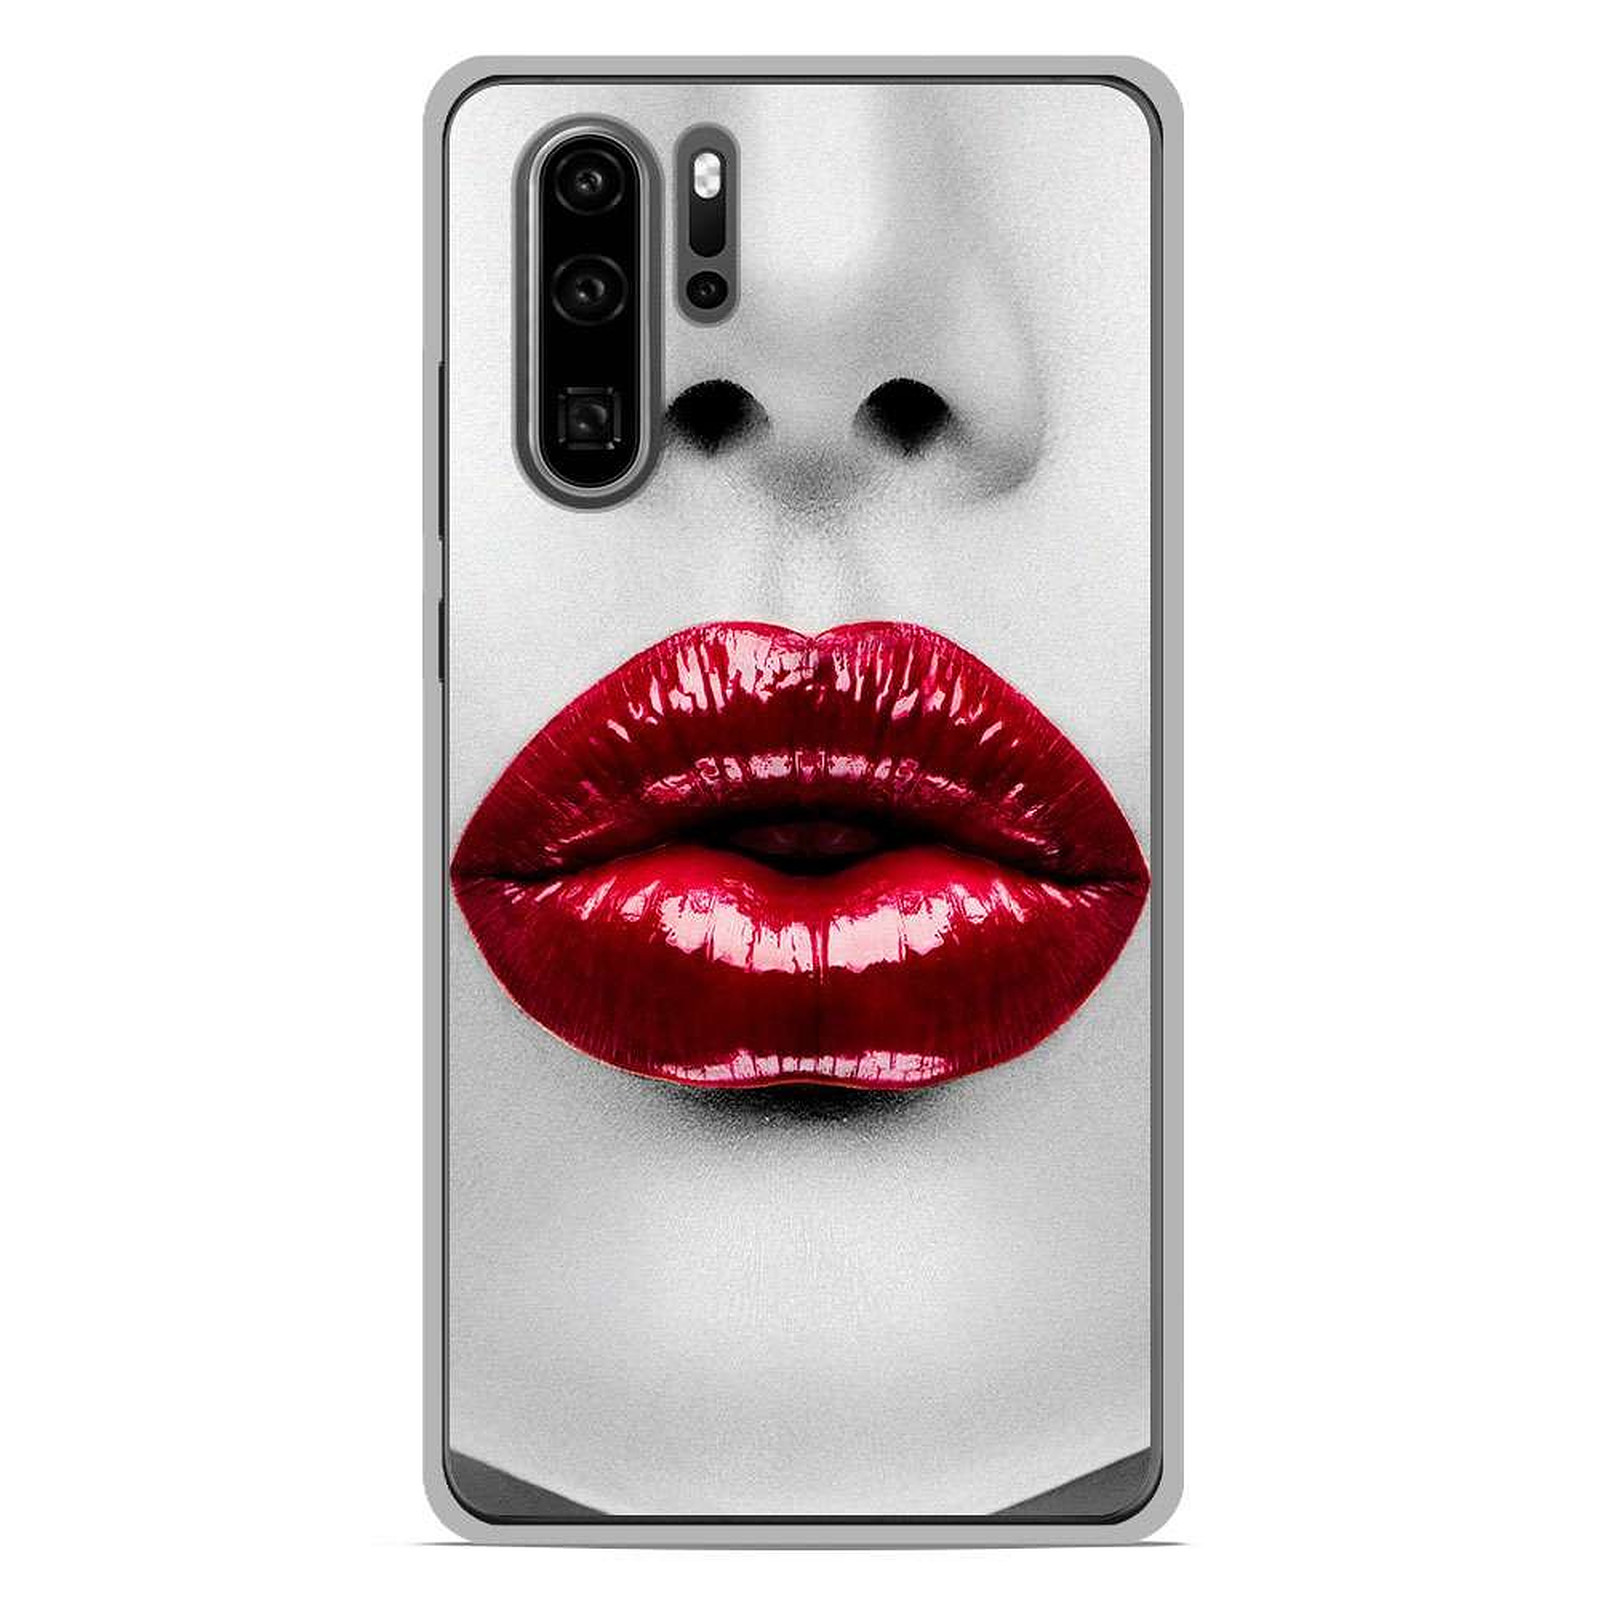 1001 Coques Coque silicone gel Huawei P30 Pro motif Lèvres Rouges - Coque telephone 1001Coques